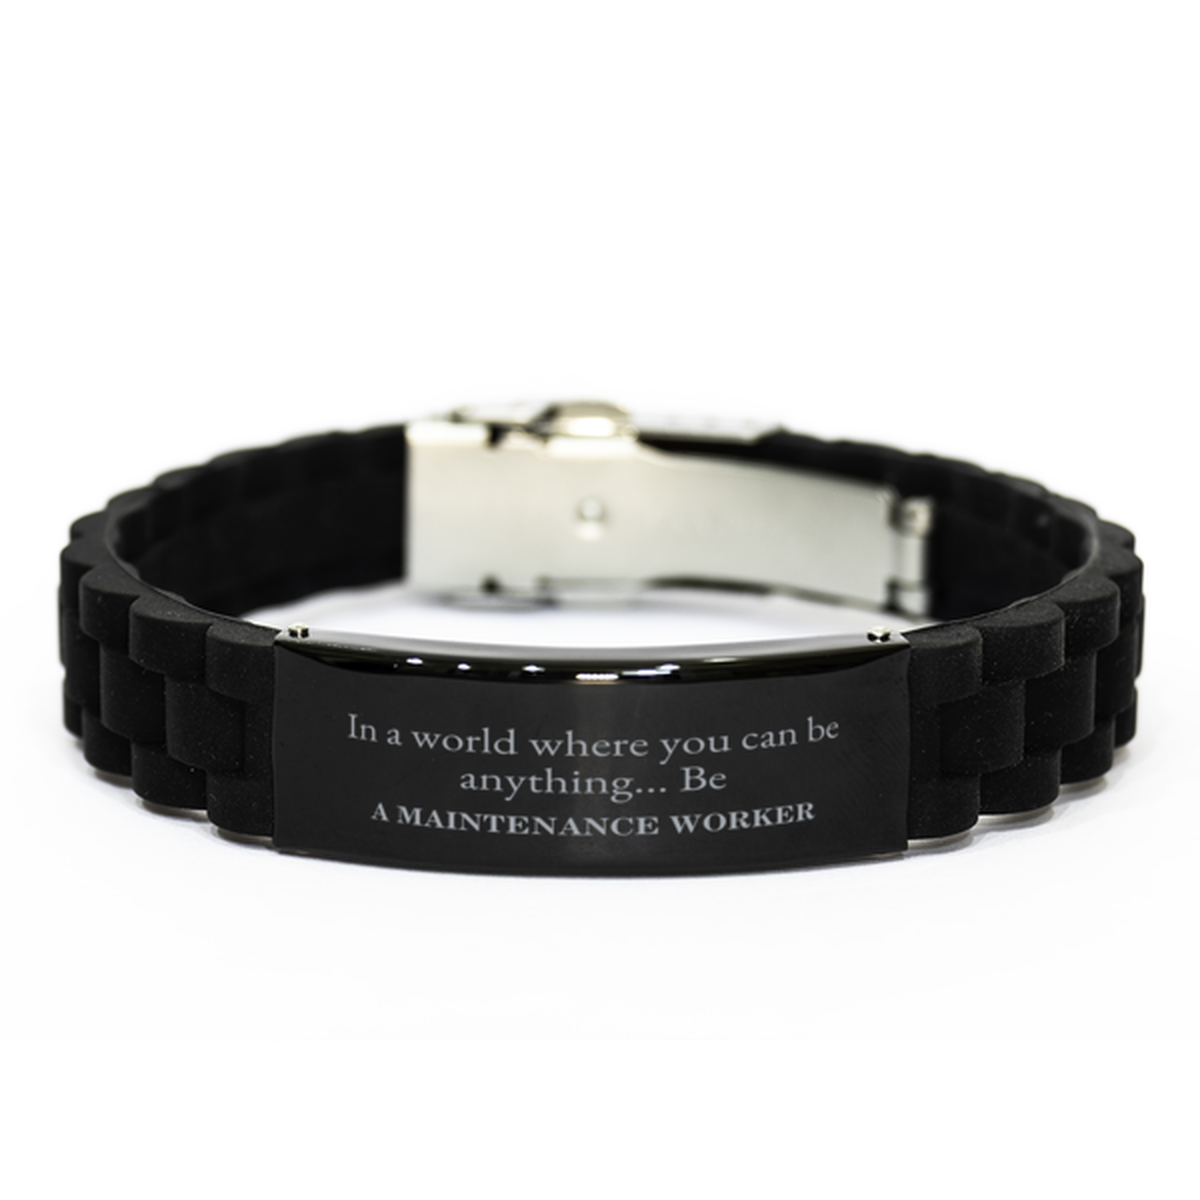 Gifts for Maintenance Worker, In a world where you can be anything, Appreciation Birthday Black Glidelock Clasp Bracelet for Men, Women, Friends, Coworkers